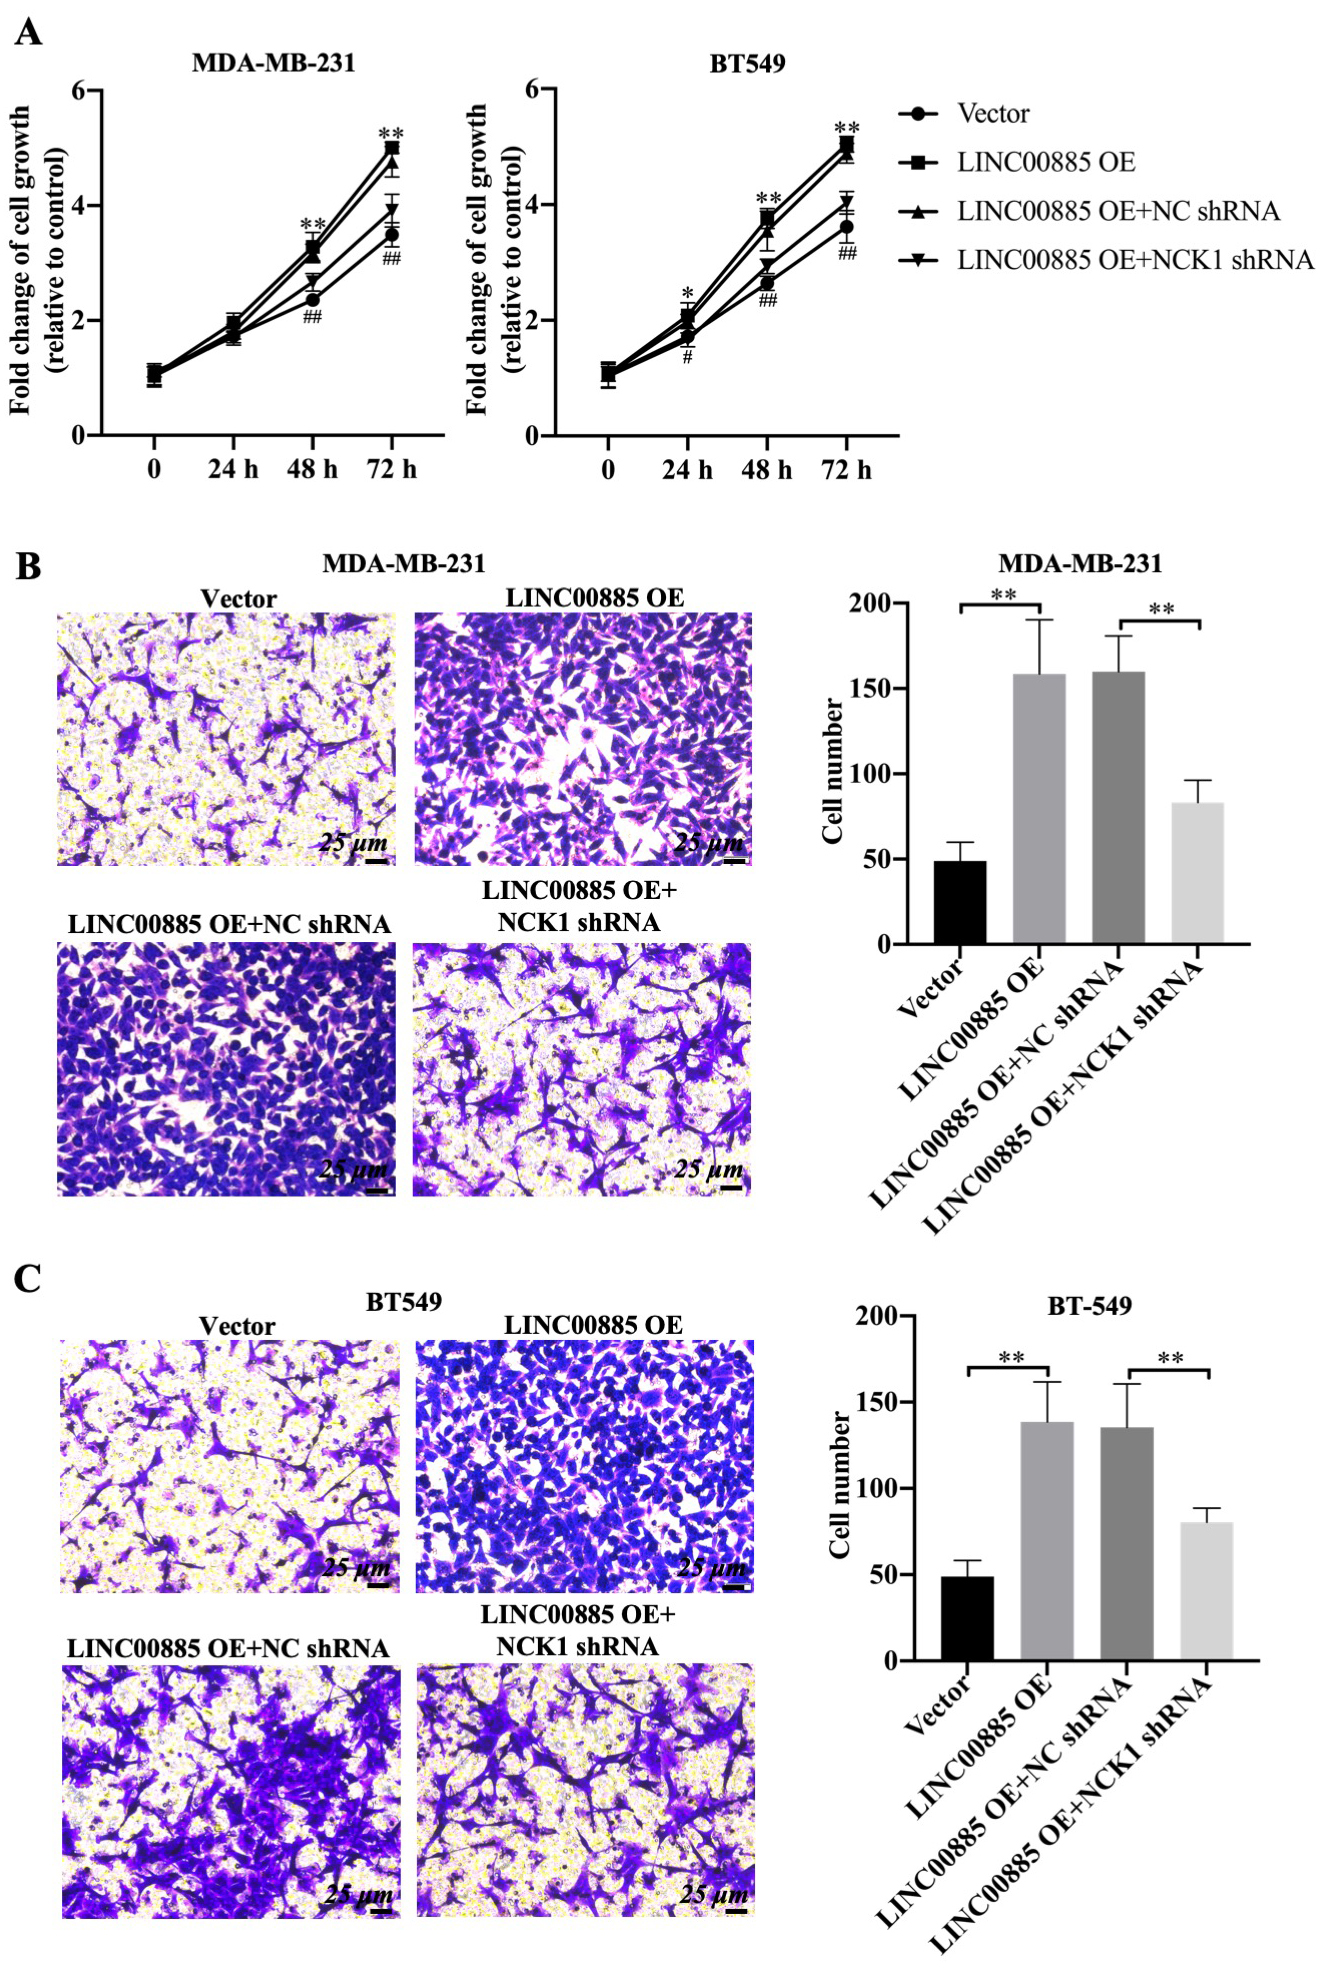 Effects of NCK1 on the migration of LINC00885-mediated triple-negative breast cancer cells. MDA-MB-231 and BT549 cells were transfected with pcDNA3.1, LINC00885-overexpression plasmid, pcDNA3.1-LINC00885 + NC-shRNA and pcDNA3.1-LINC00885 + shRNA-NCK1. (A) Cell growth of MDA-MB-231 cells and BT549 cells as measured using the Cell Counting Kit-8 assay. (B) MDA-MB-231 and (C) BT549 cell migration was assessed using the Transwell assay. The relative quantification of migrated cells is illustrated in the right panel (scale bar, 25 μm). * P< 0.05 and ** P< 0.01. NCK1, noncatalytic region of tyrosine kinase 1; NC, negative control; pcDNA3.1, plasmid NC; si-RNA, small interfering RNA; pcDNA3.1-LINC00885, LINC00885-overexpression plasmid; siRNA-LINC00885, siRNA targeting LINC00885.